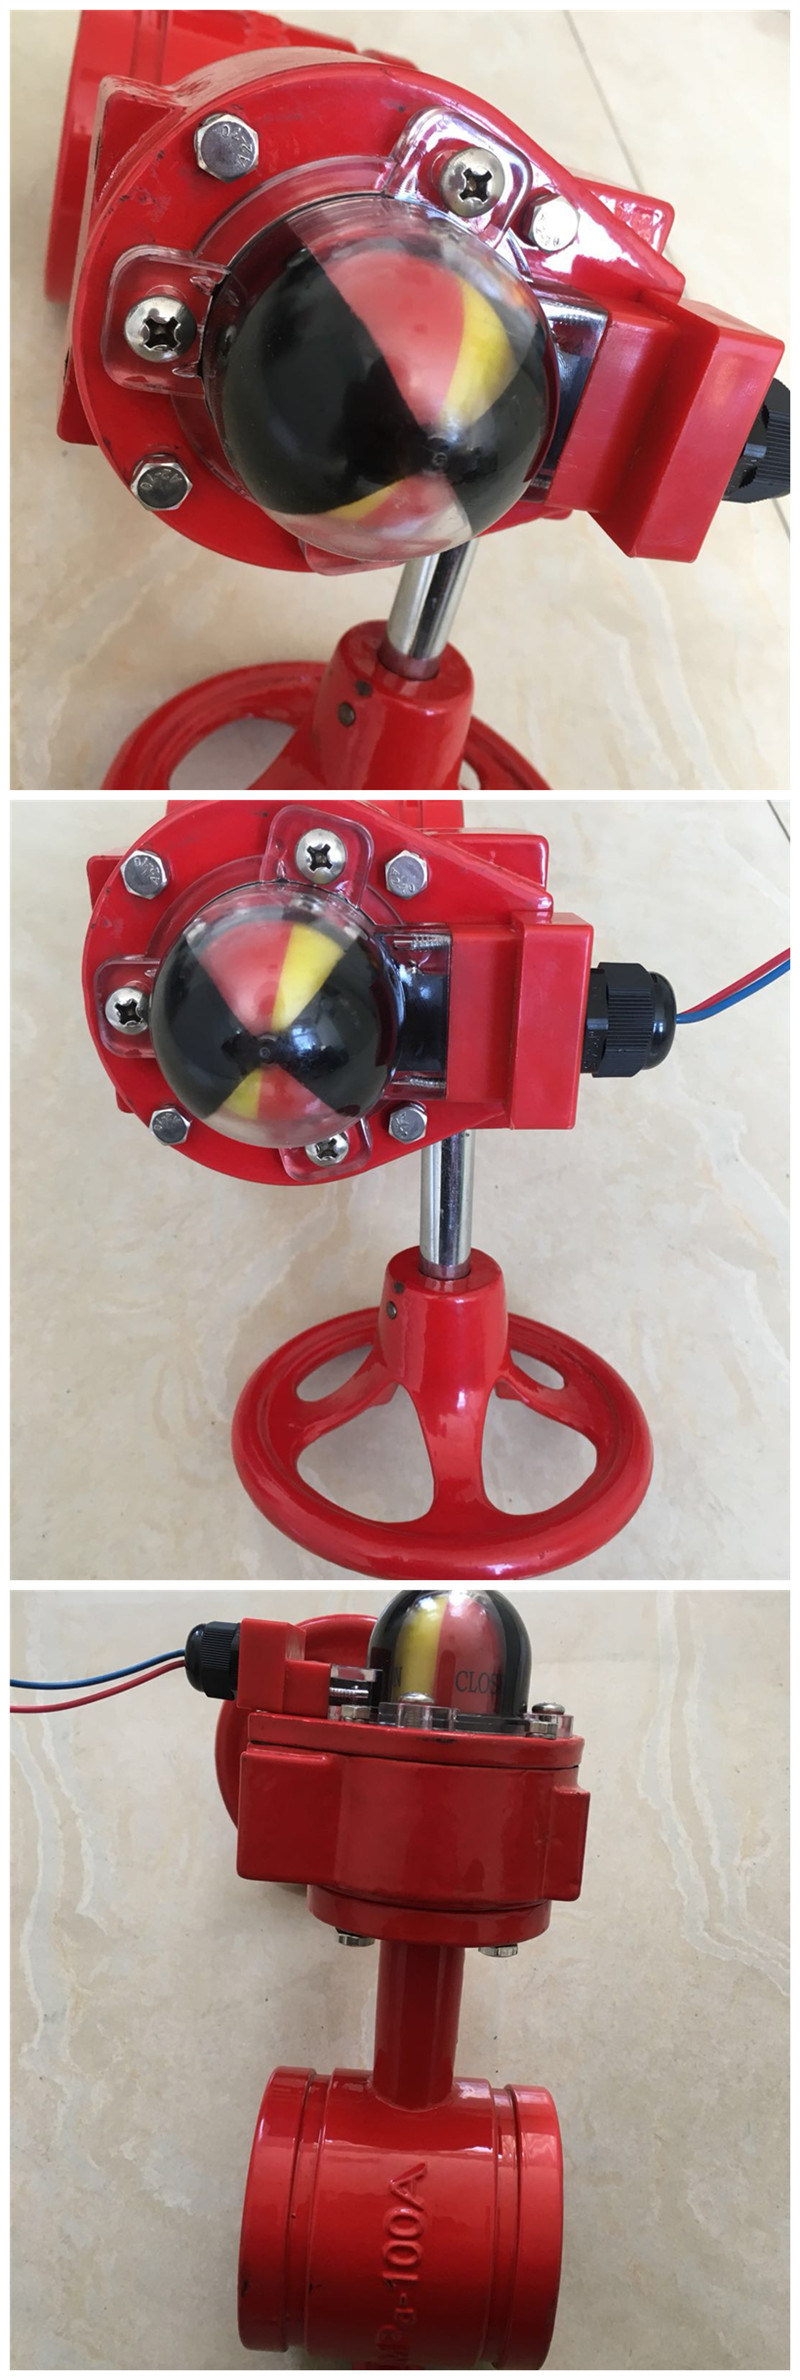 Handle Grooved/Trench Fire Control Signal Butterfly Valve